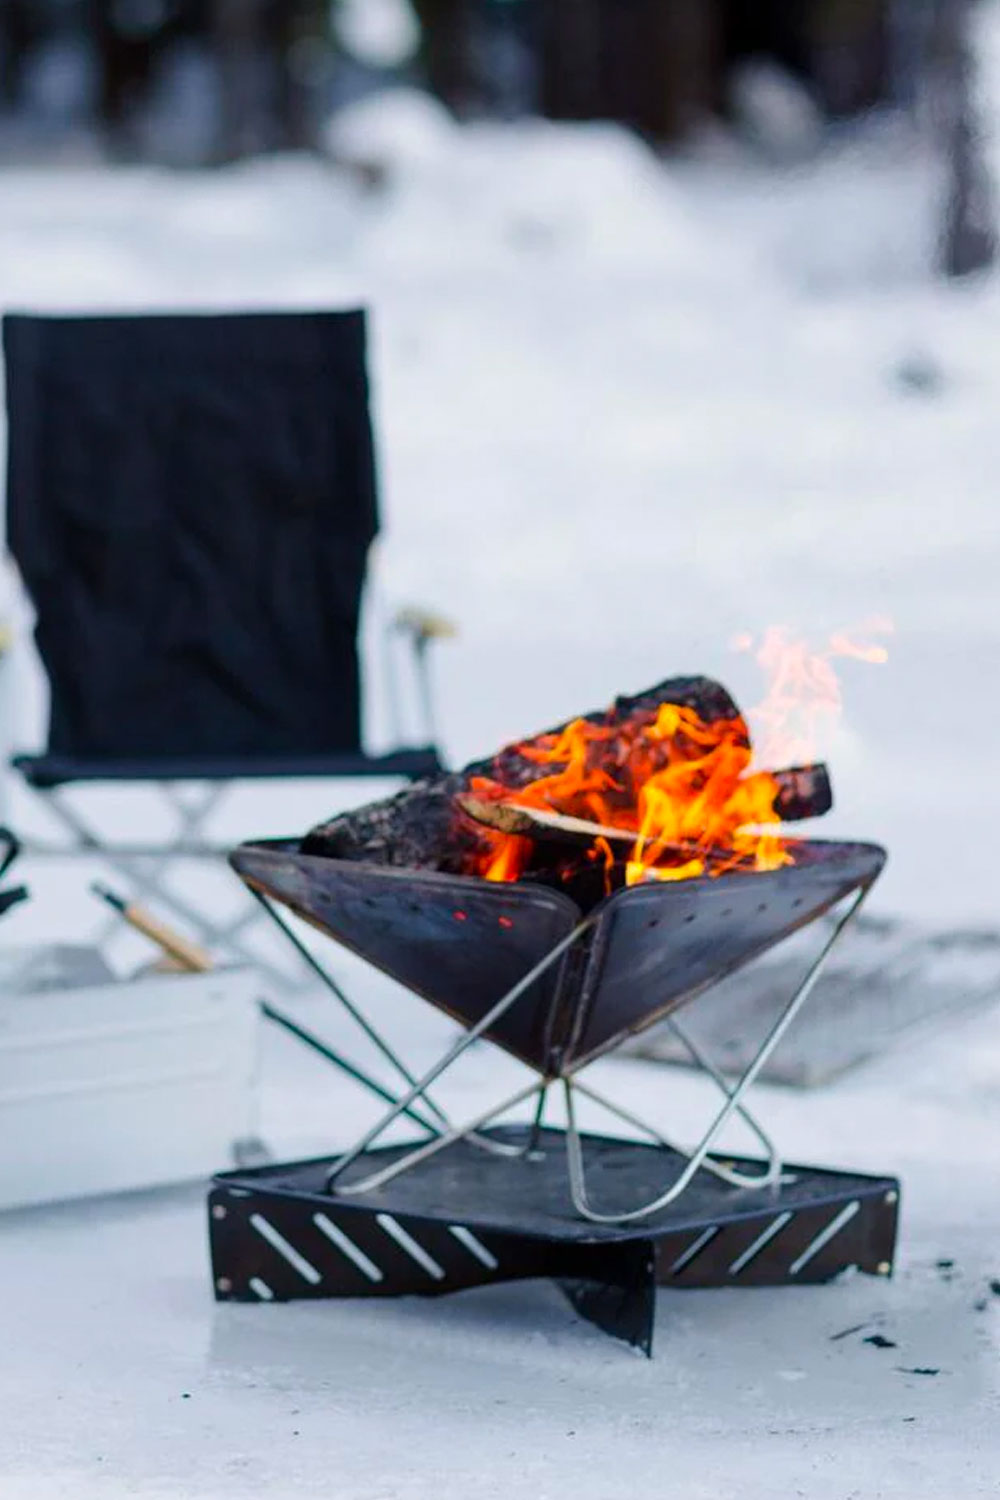 The SNOW PEAK - PACK AND CARRY FIREPLACE LARGE  available online with global shipping, and in PAM Stores Melbourne and Sydney.